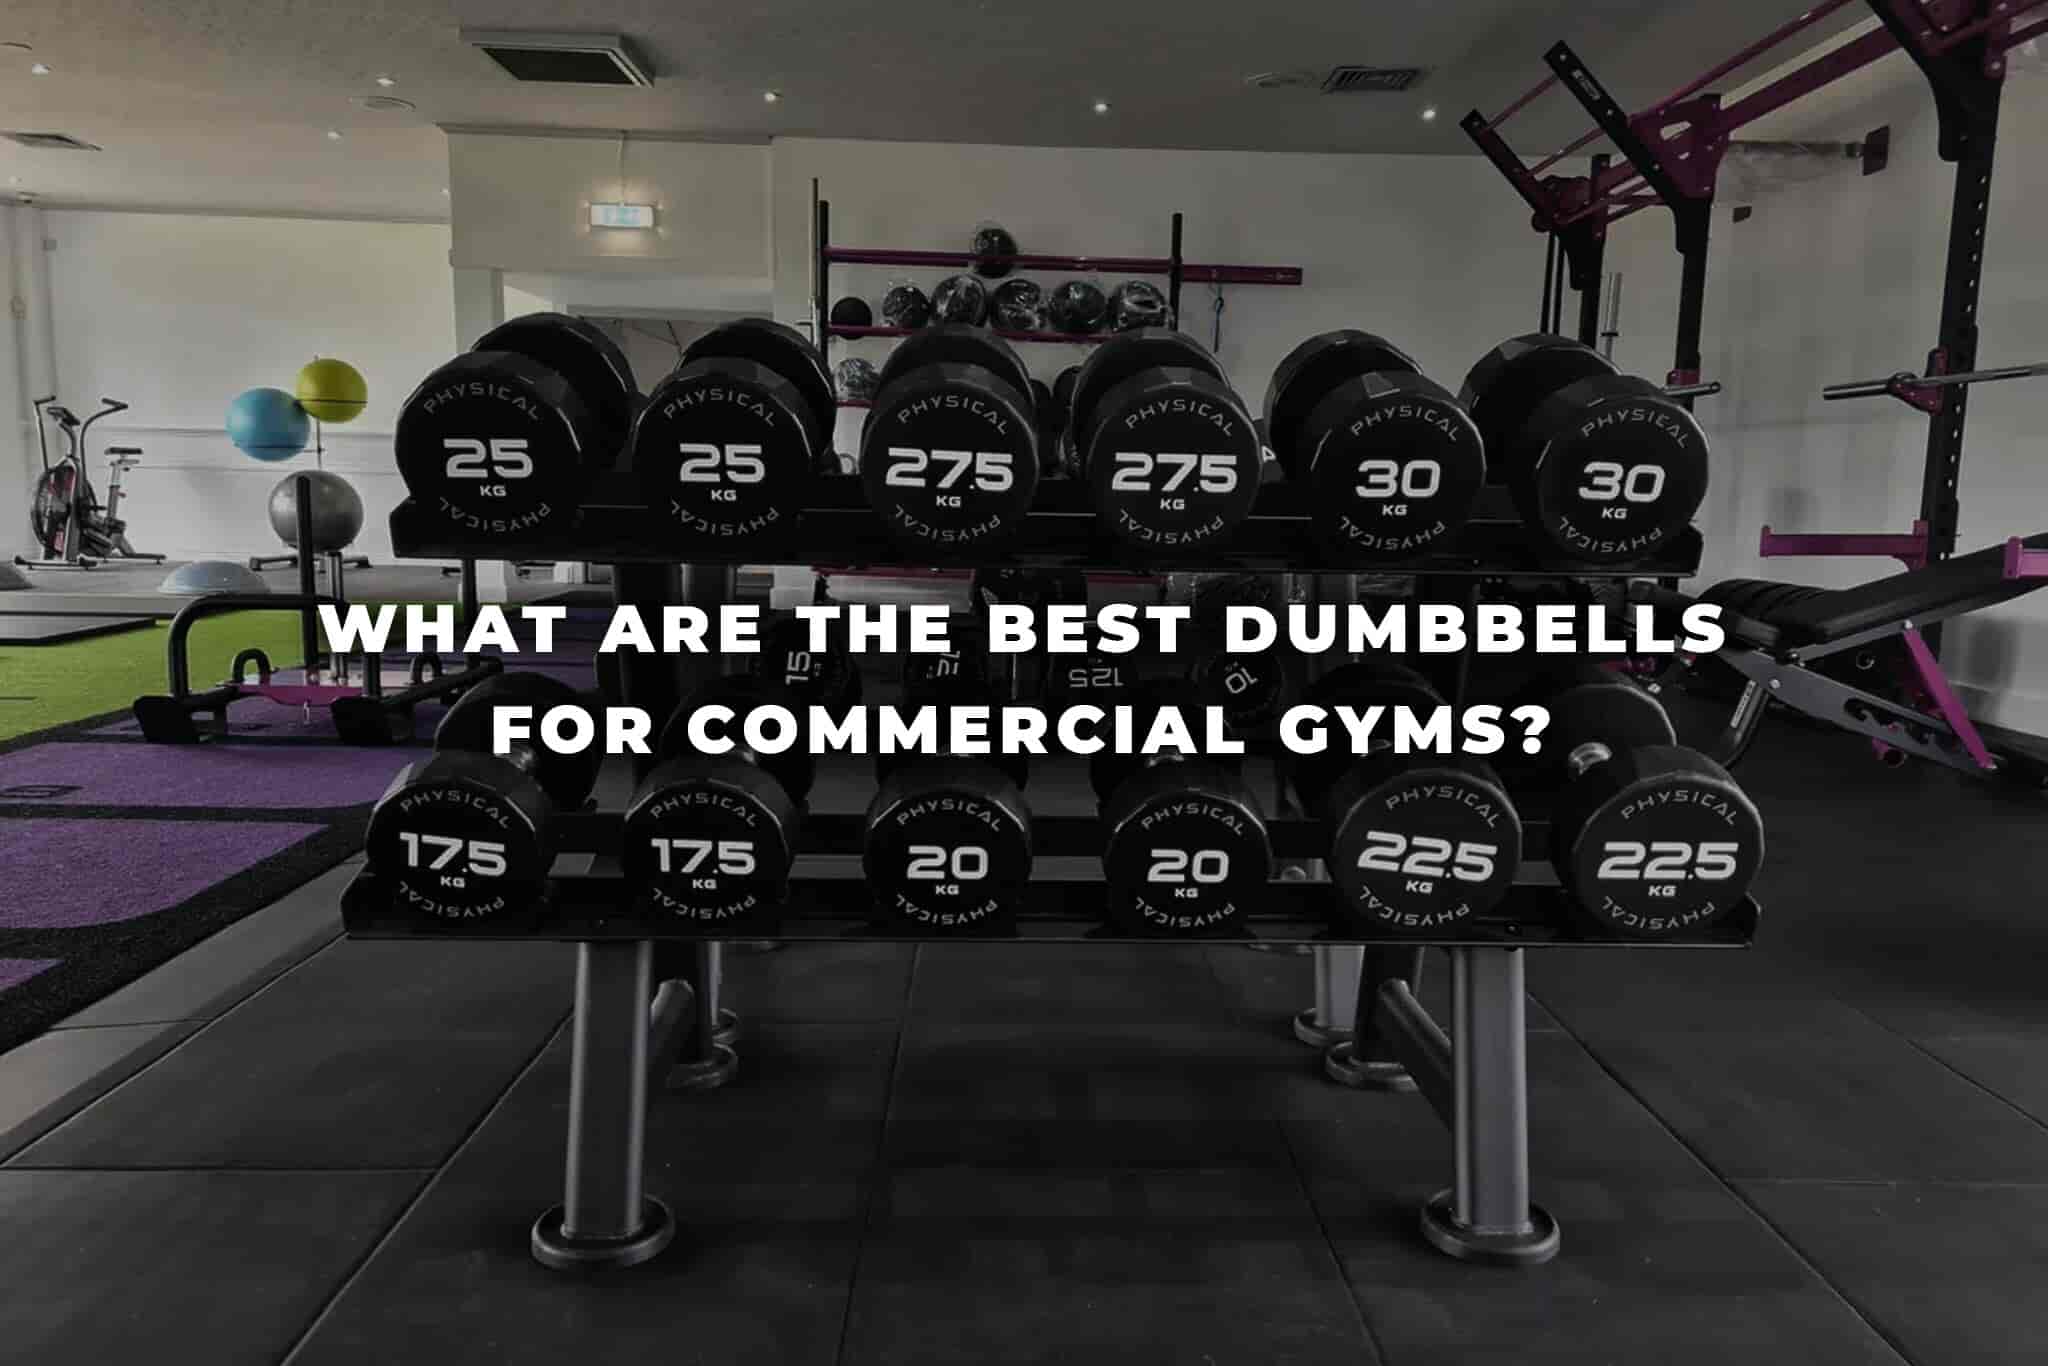 What are the best dumbbells for commercial gyms?